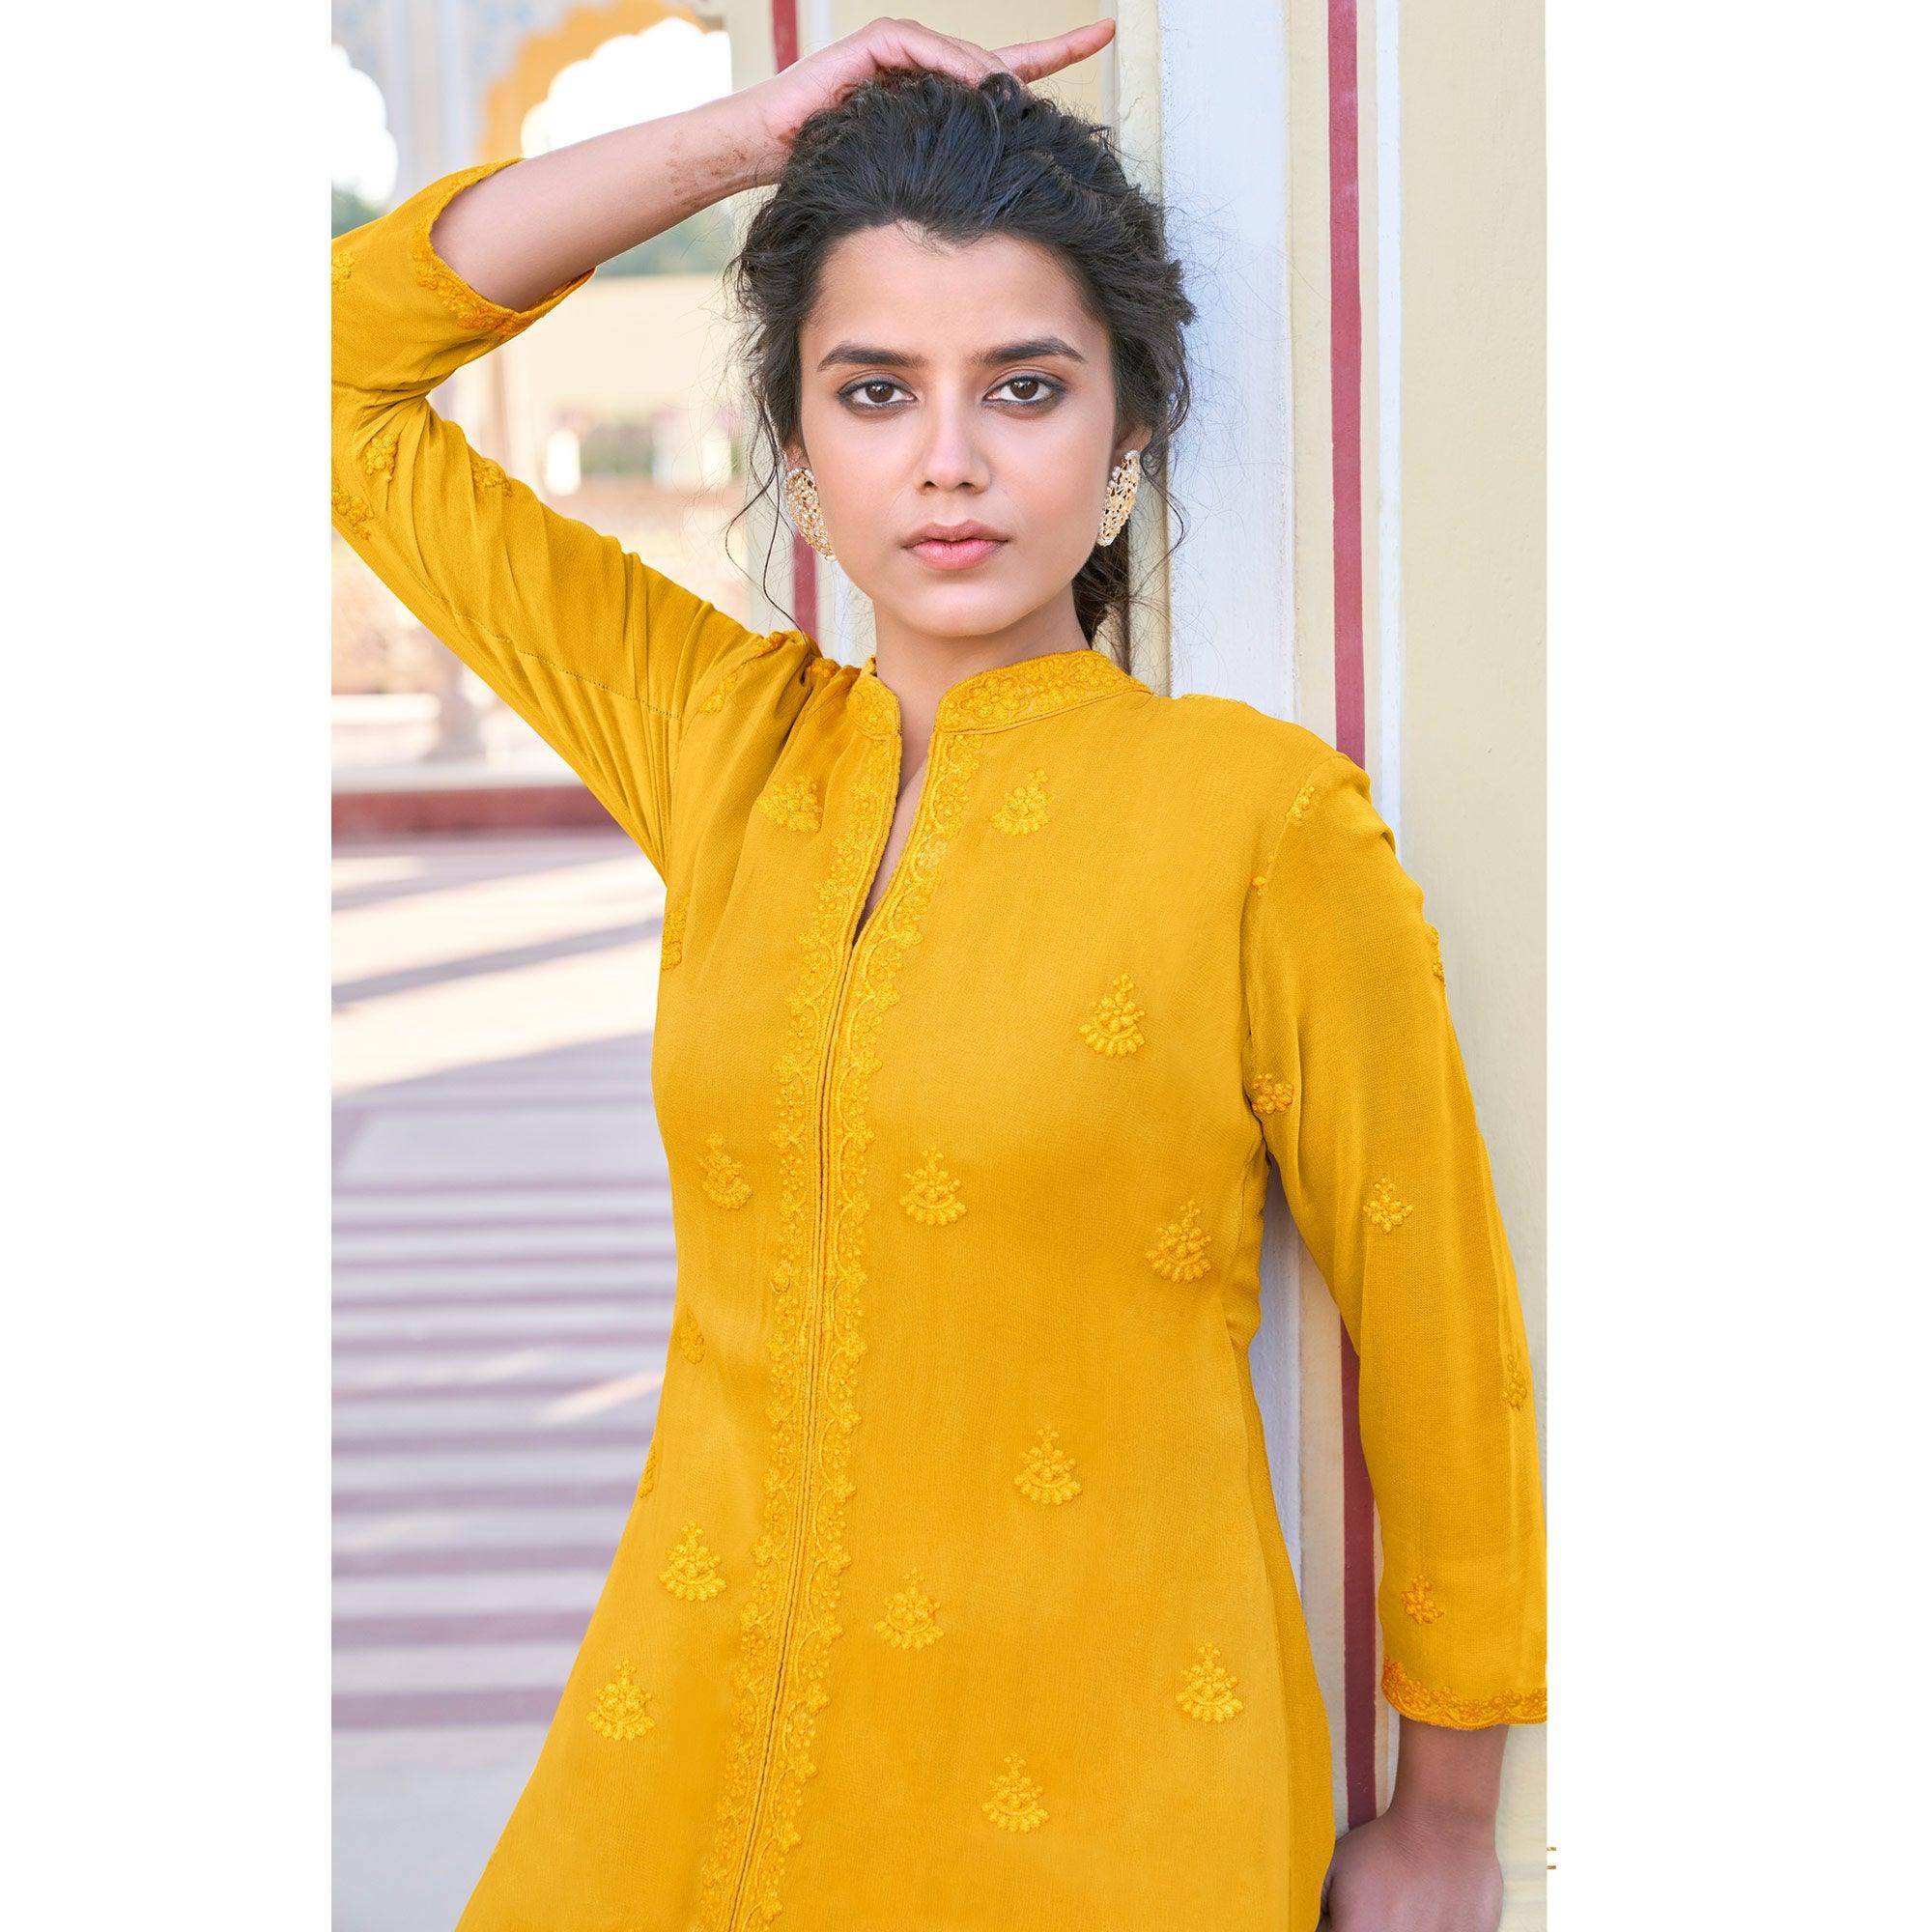 Kurtas | Pure Jaipuri Cotton Kurti😍 Multicolored 🧡💜💚 With Net Sleeves  And Stand Collar.. It's A Very Great And Elegant Kurti Worn Only 1-2  Times..Size-L | Freeup